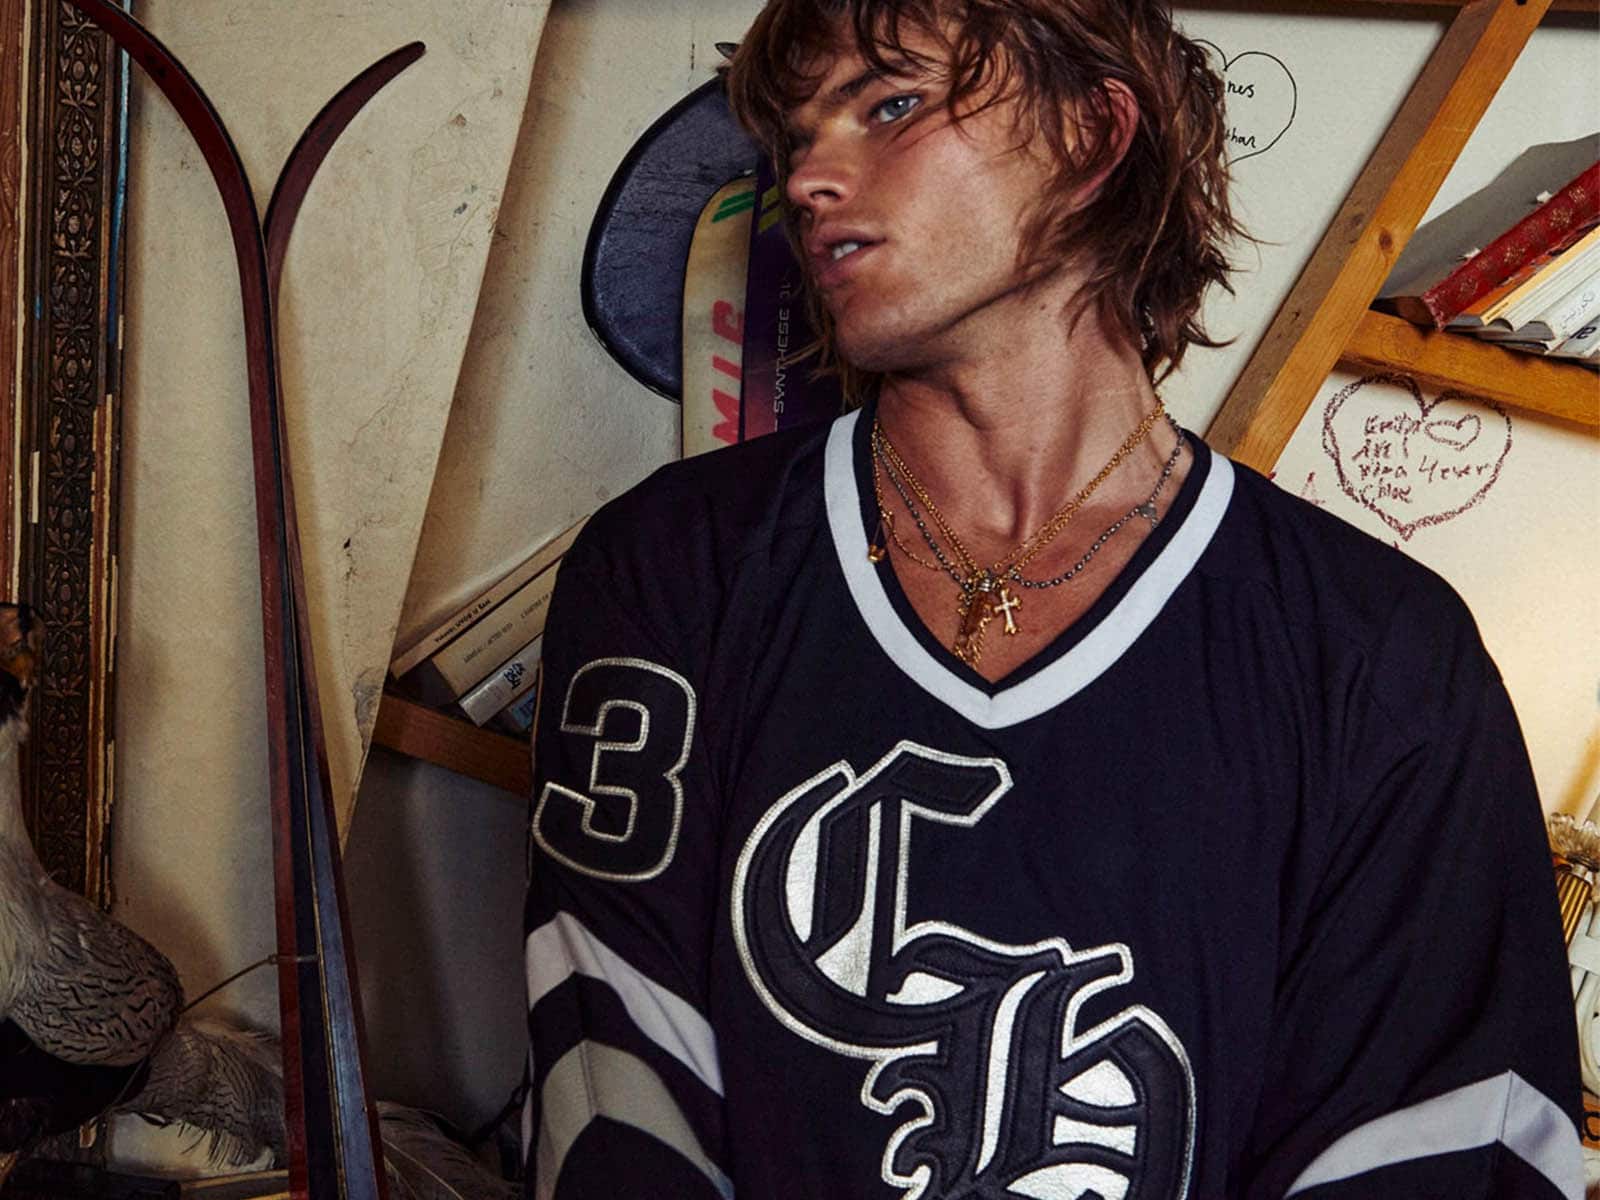 Chrome Hearts releases hockey jerseys number 33